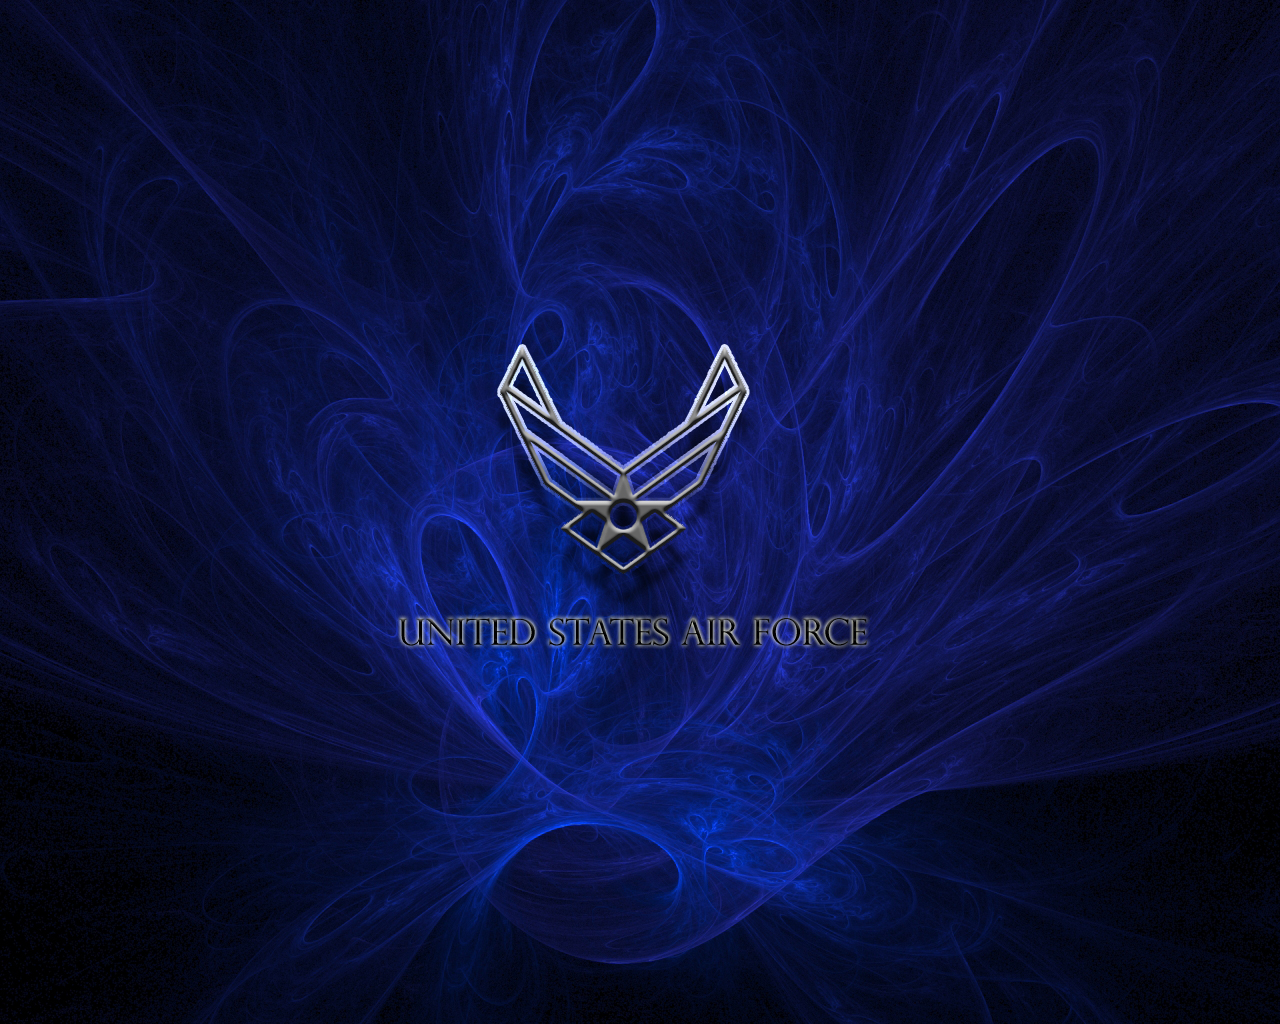 Usaf Logo Wallpaper A tribute to the usaf by